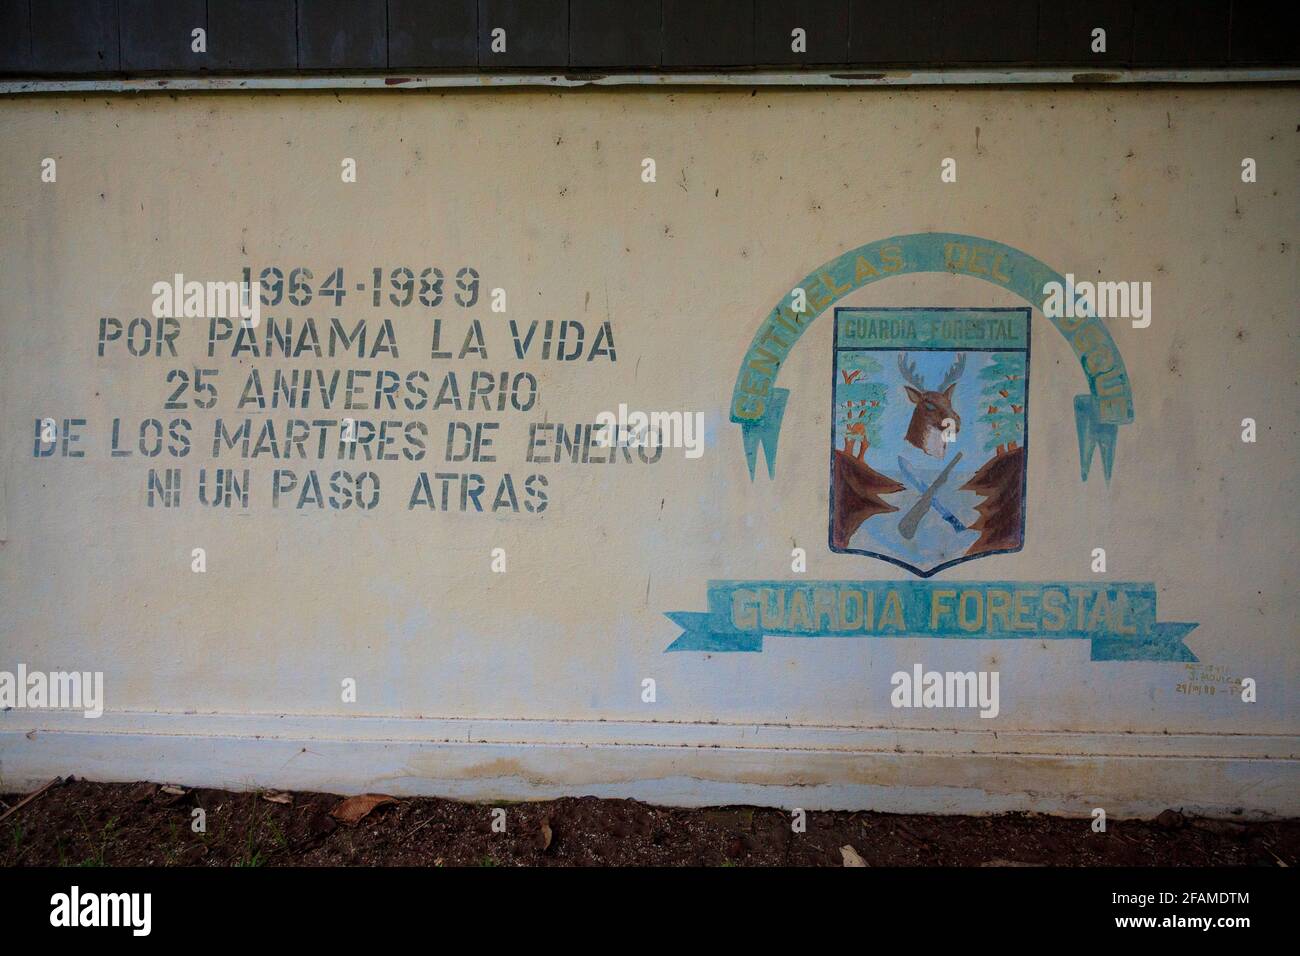 Wall painting with banner and text on the old police station building in the town of Gamboa, Colon province, Republic of Panama, Central America. Stock Photo